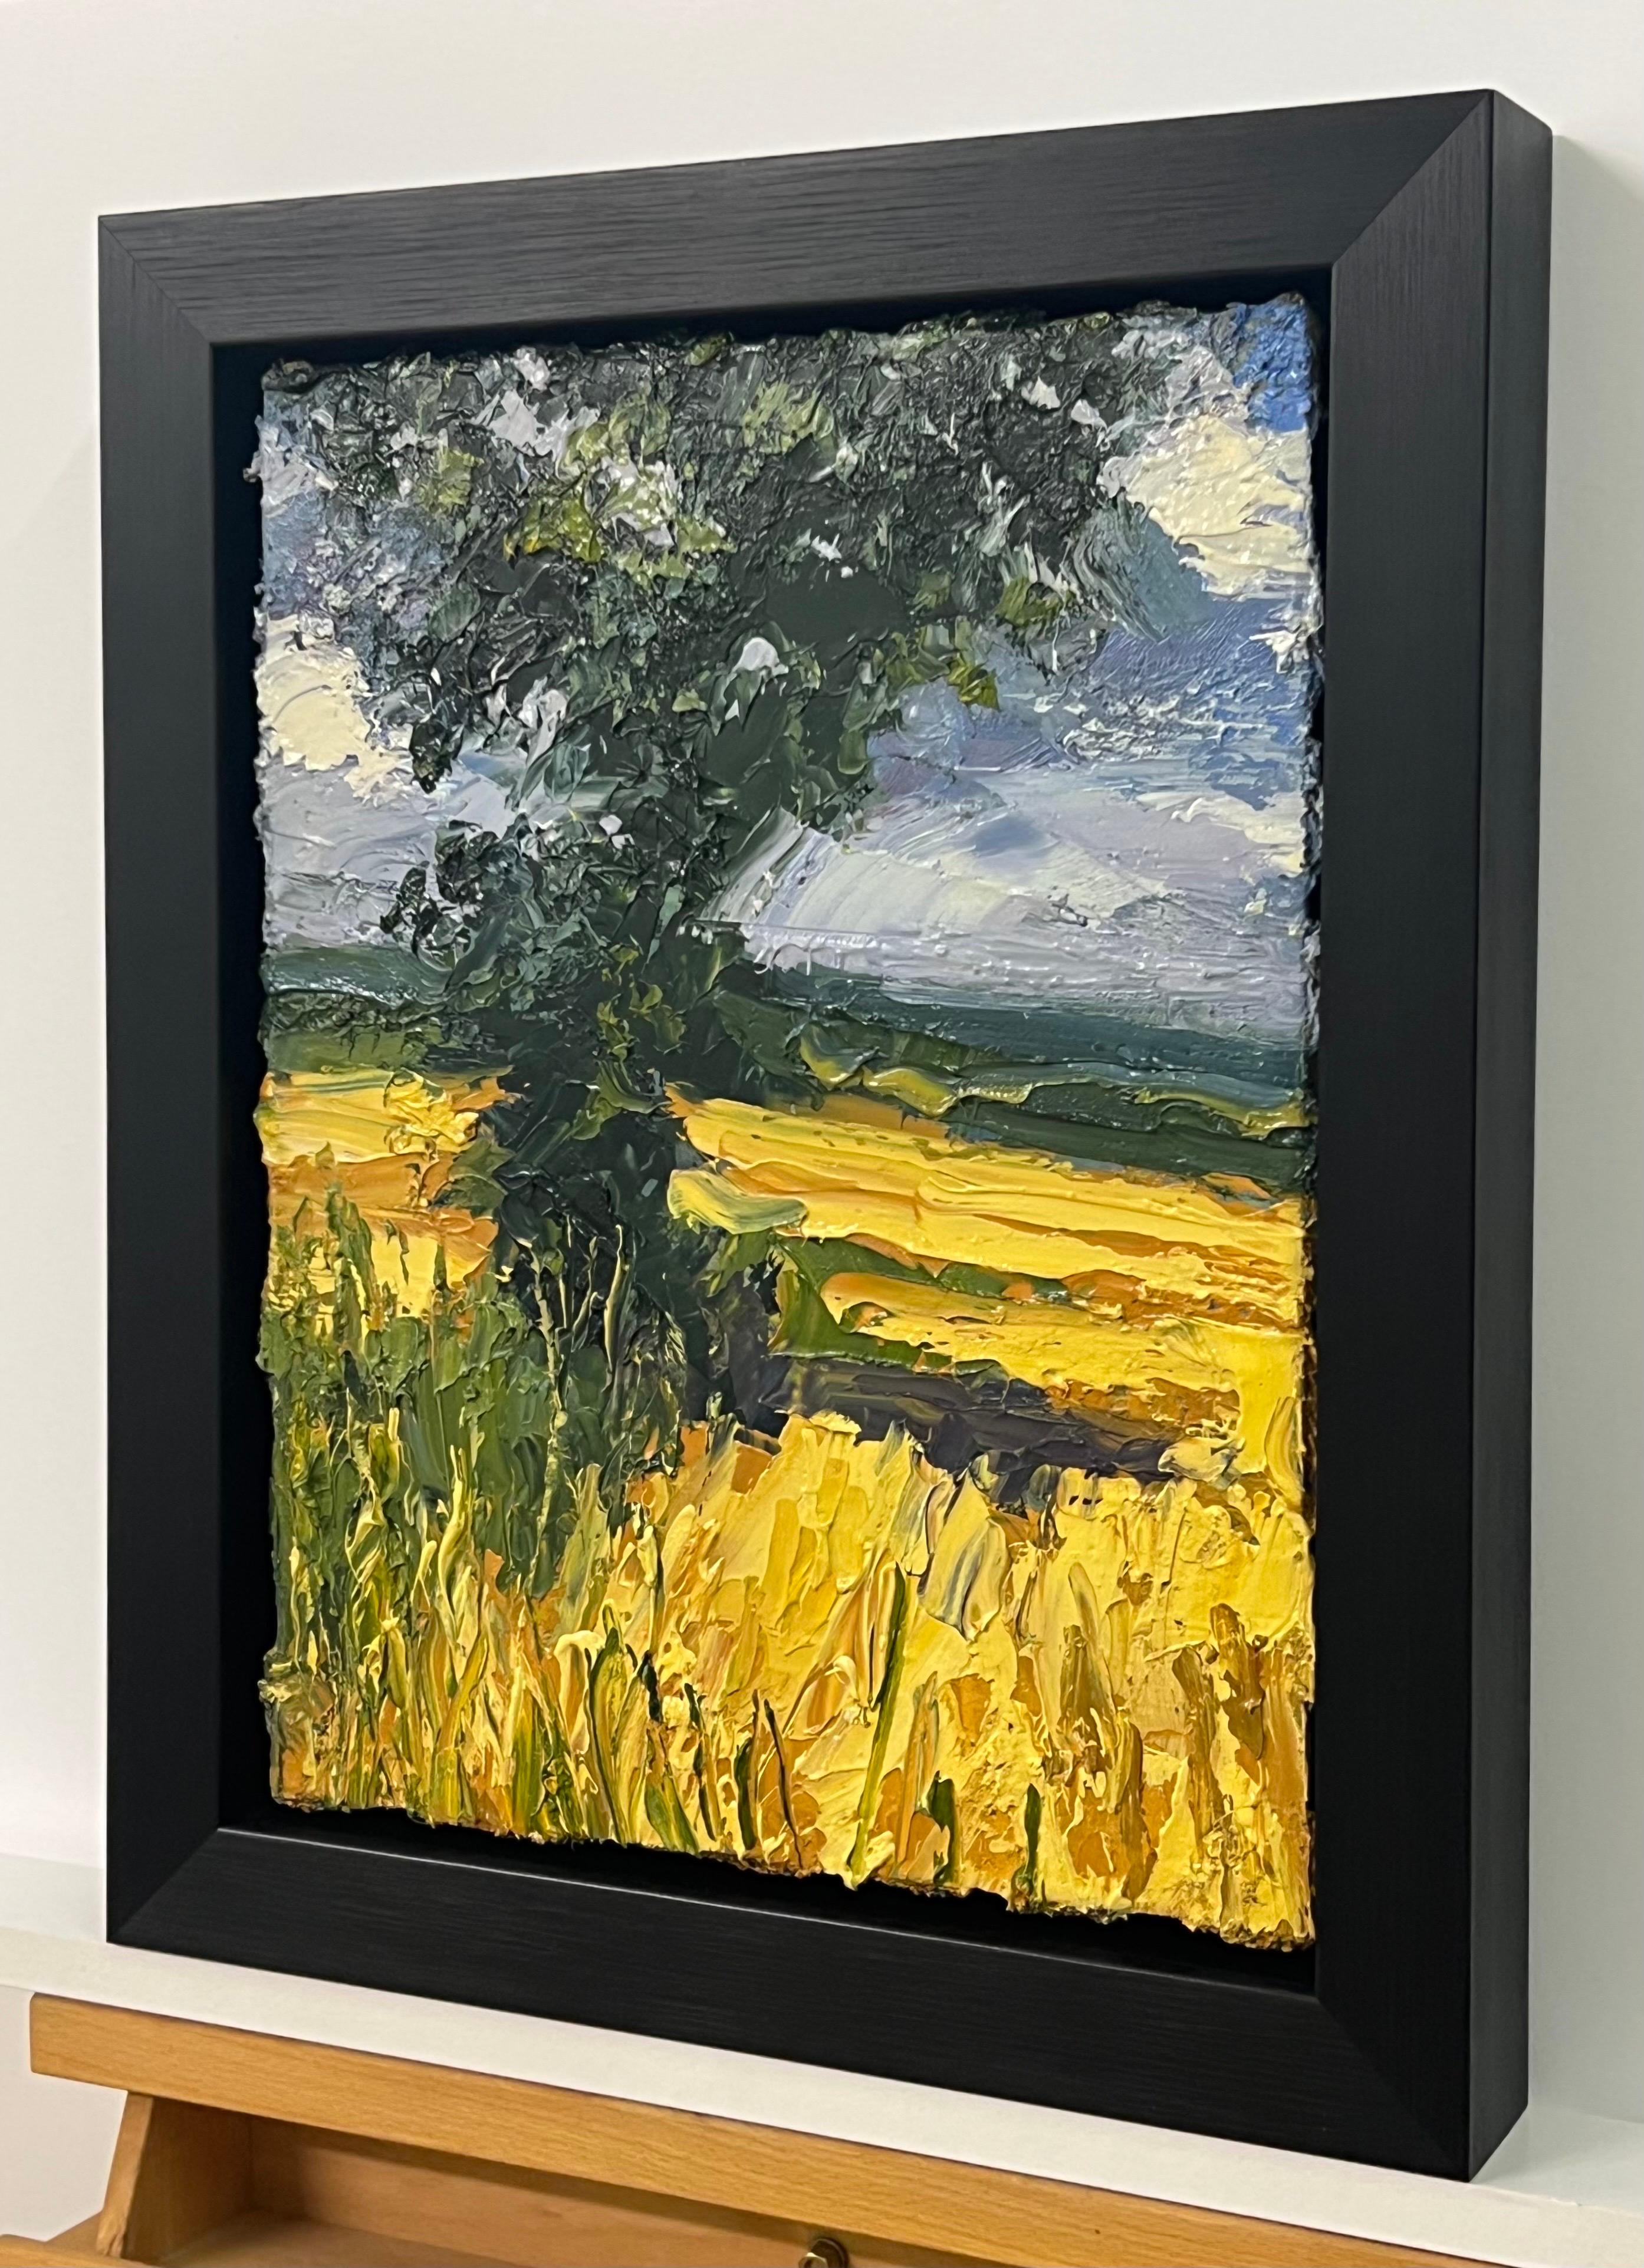 Impasto Oil Painting of Oak Tree in Yellow Corn Field in the English Countryside by British Landscape Artist, Colin Halliday. This painting articulates the intensity of the colours and irregular nature of the rustic landscape in Northern England.